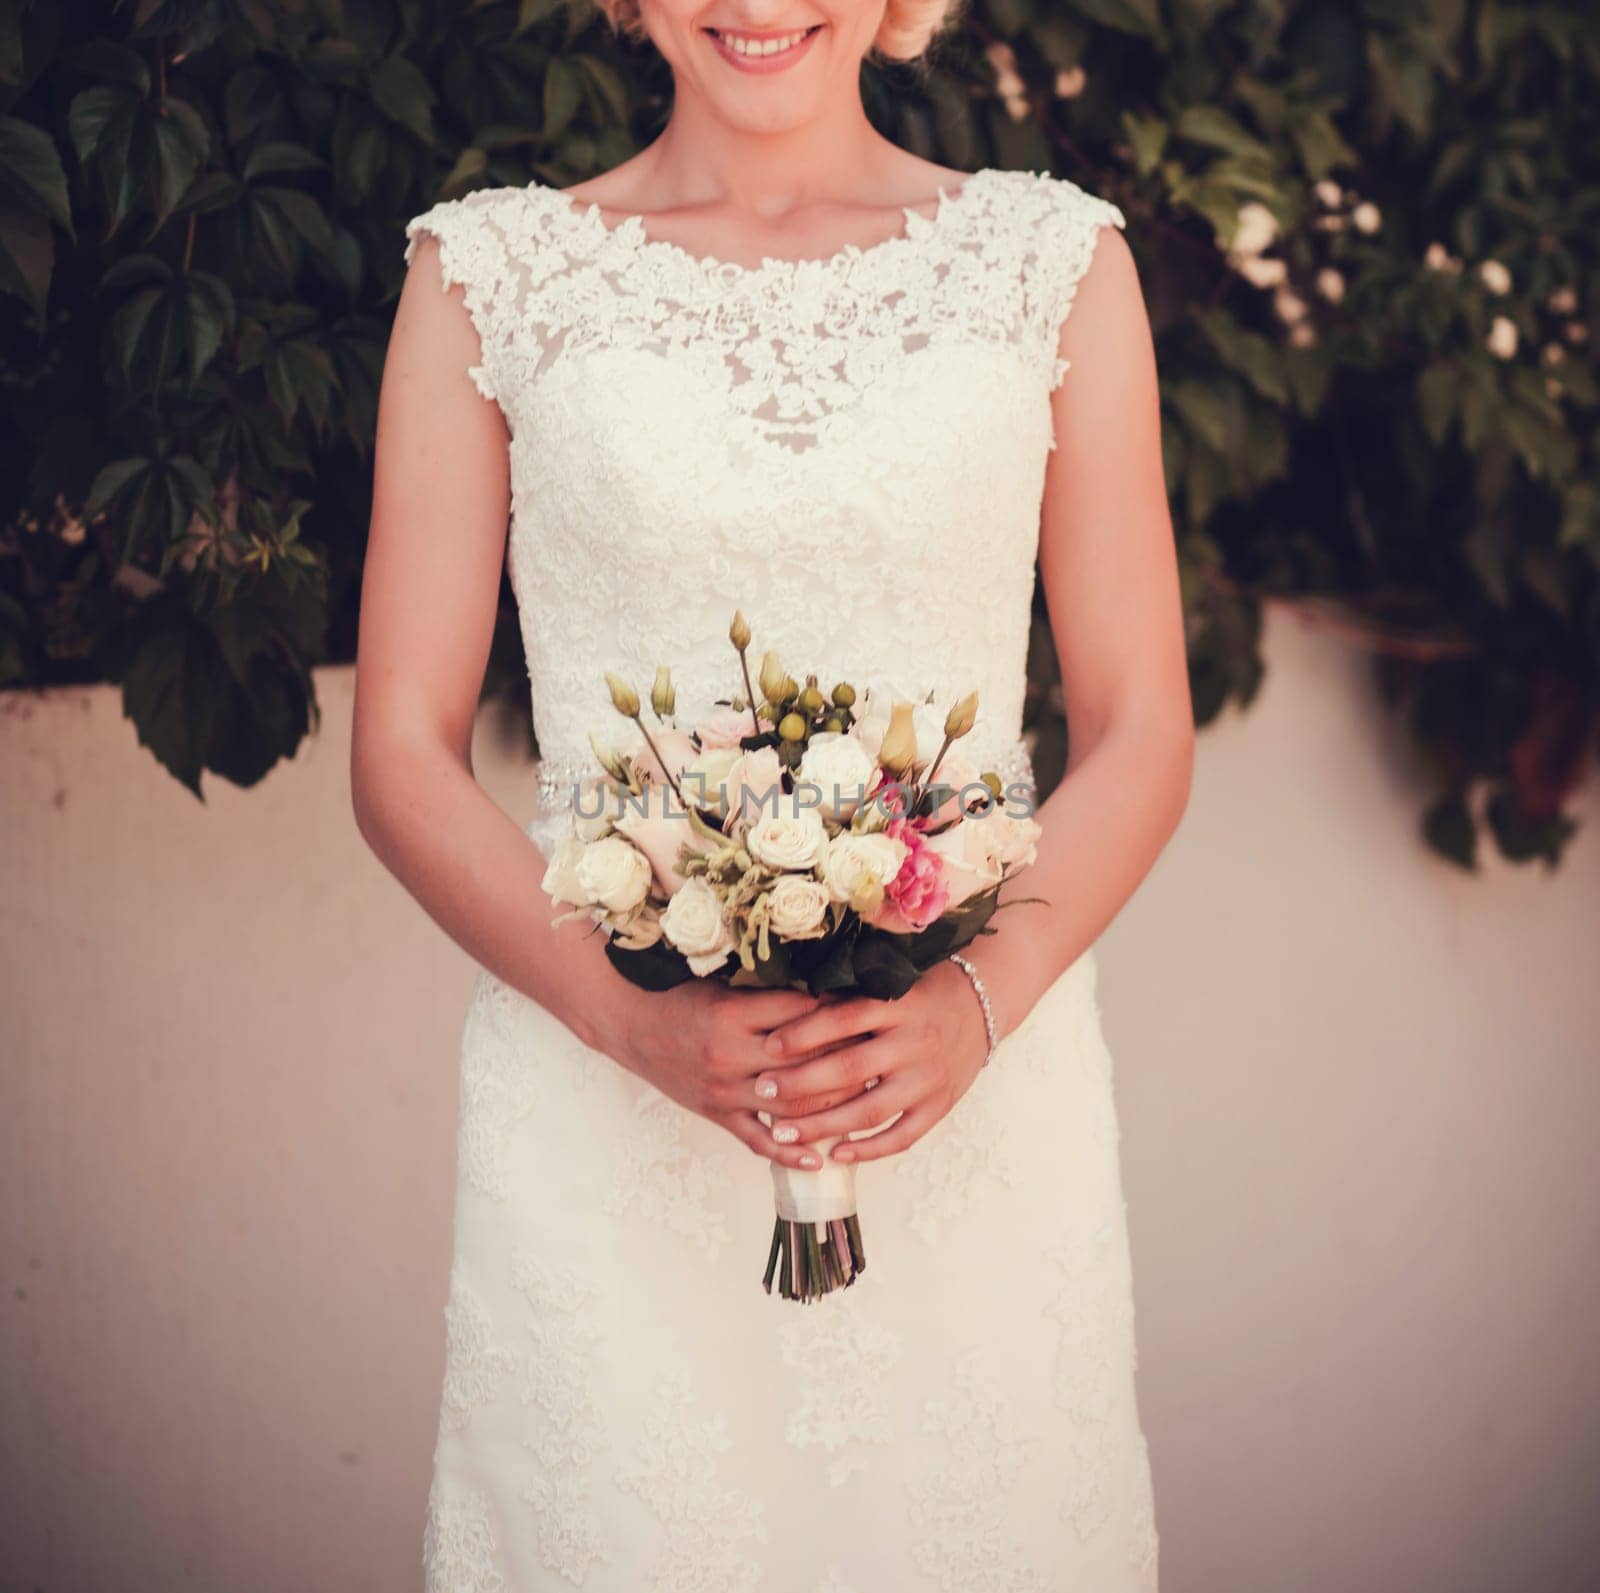 portrait of a happy bride with a bouquet of flowers outdoors